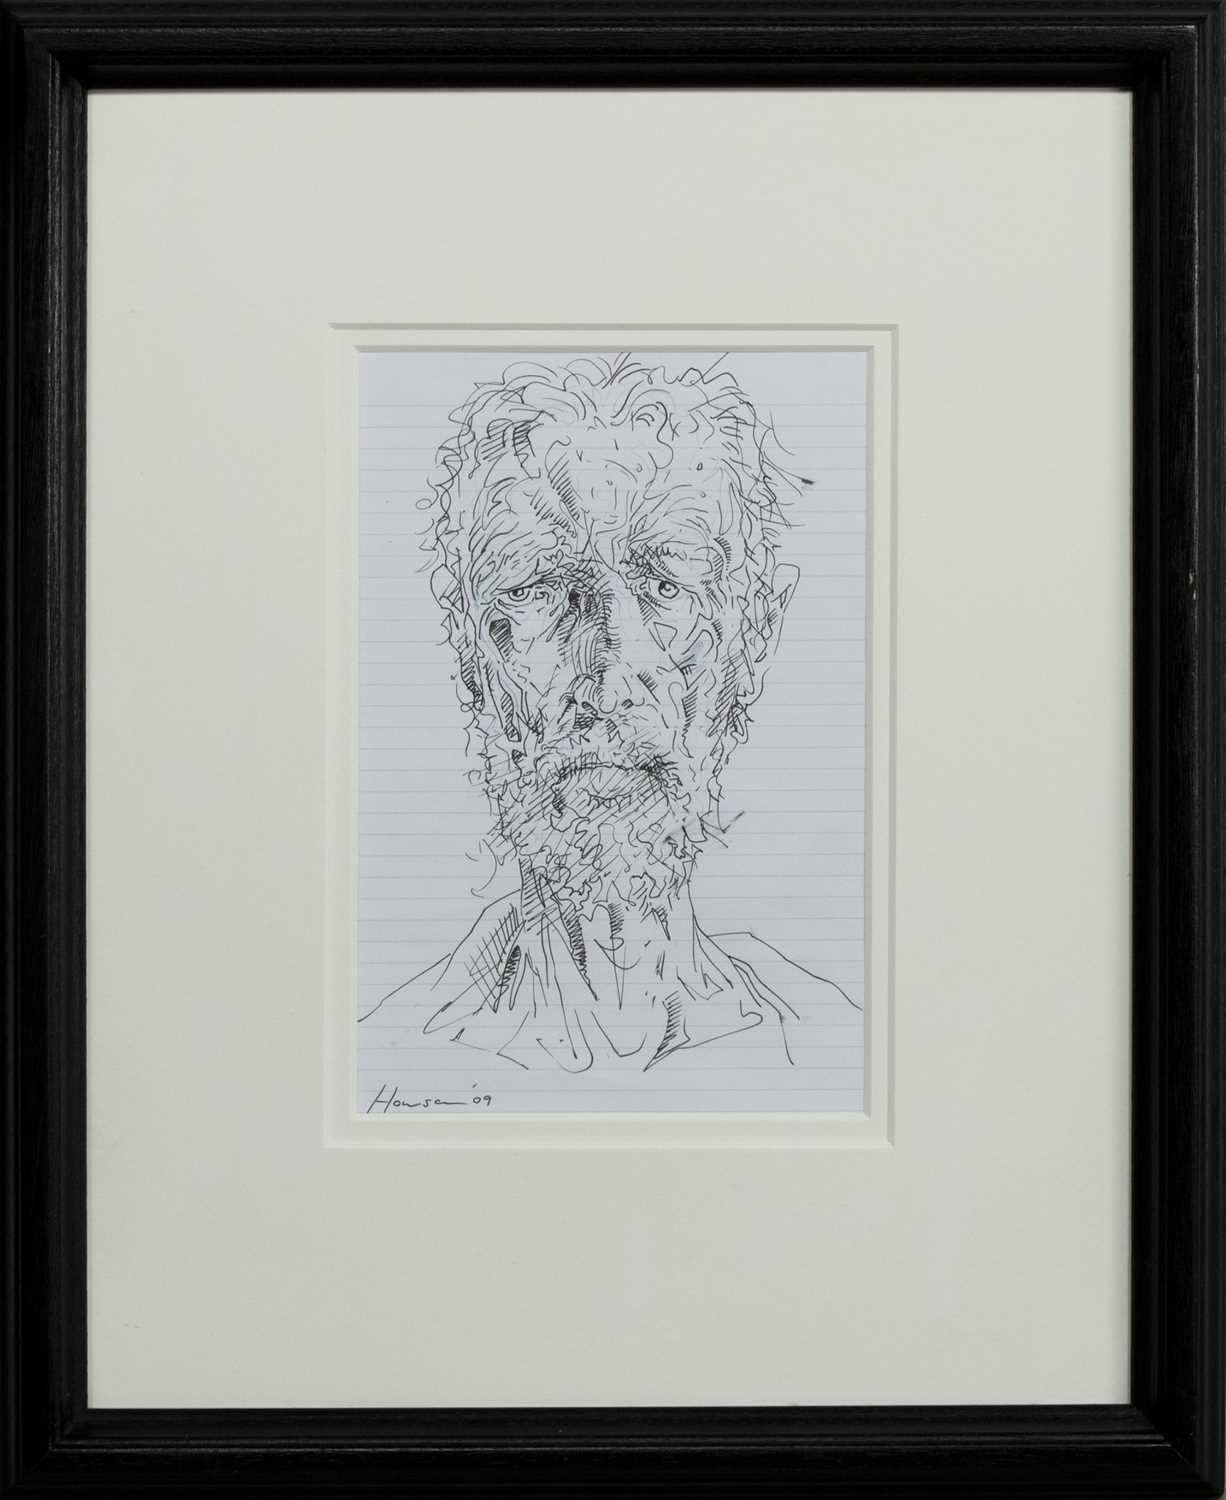 AN UNTITLED SKETCH BY PETER HOWSON